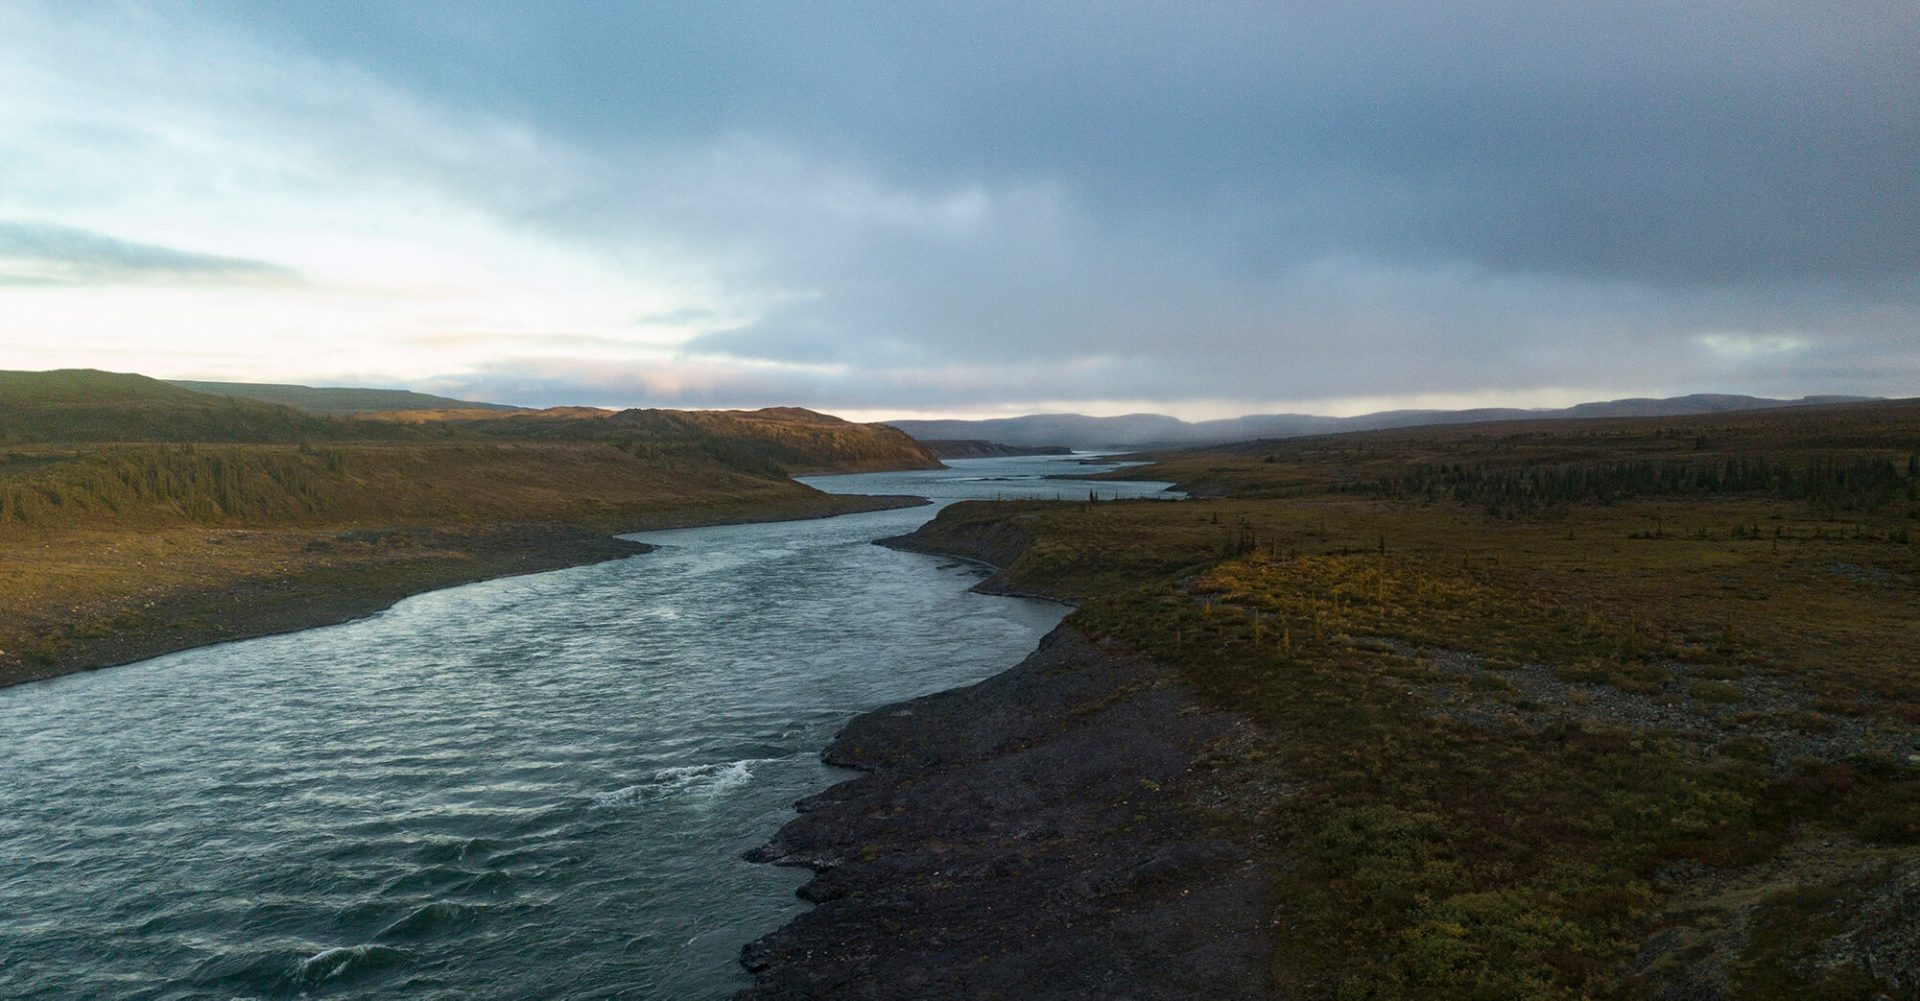 Evening on the Coppermine River